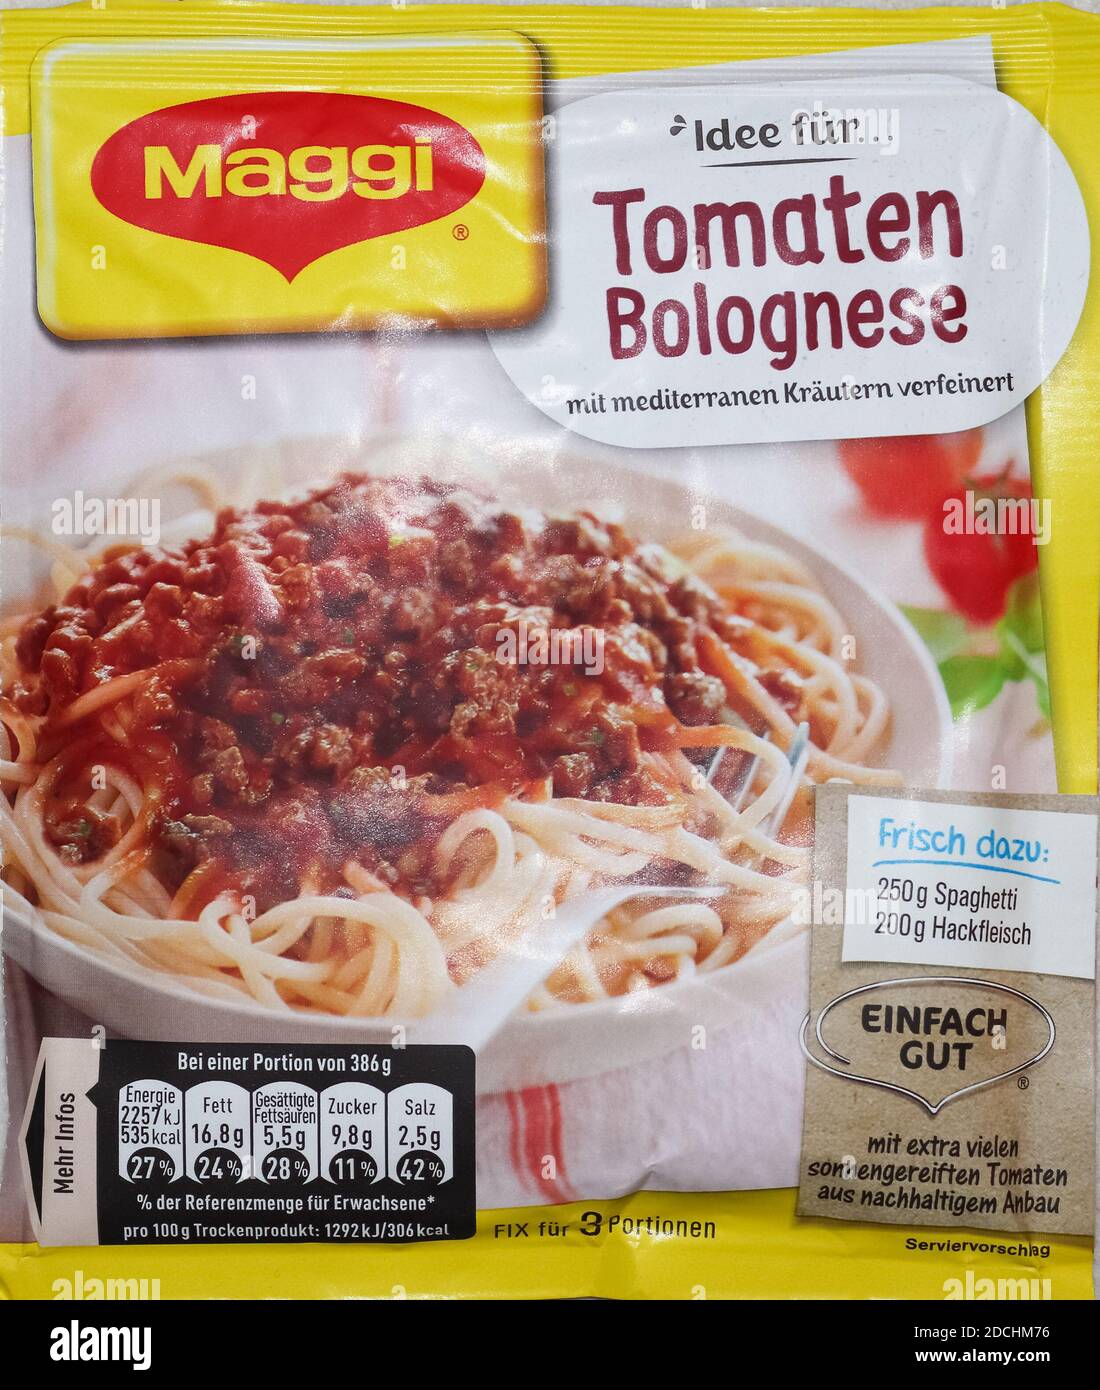 German Maggi instant noodles called Spaghetti Bolognese, owned by ...